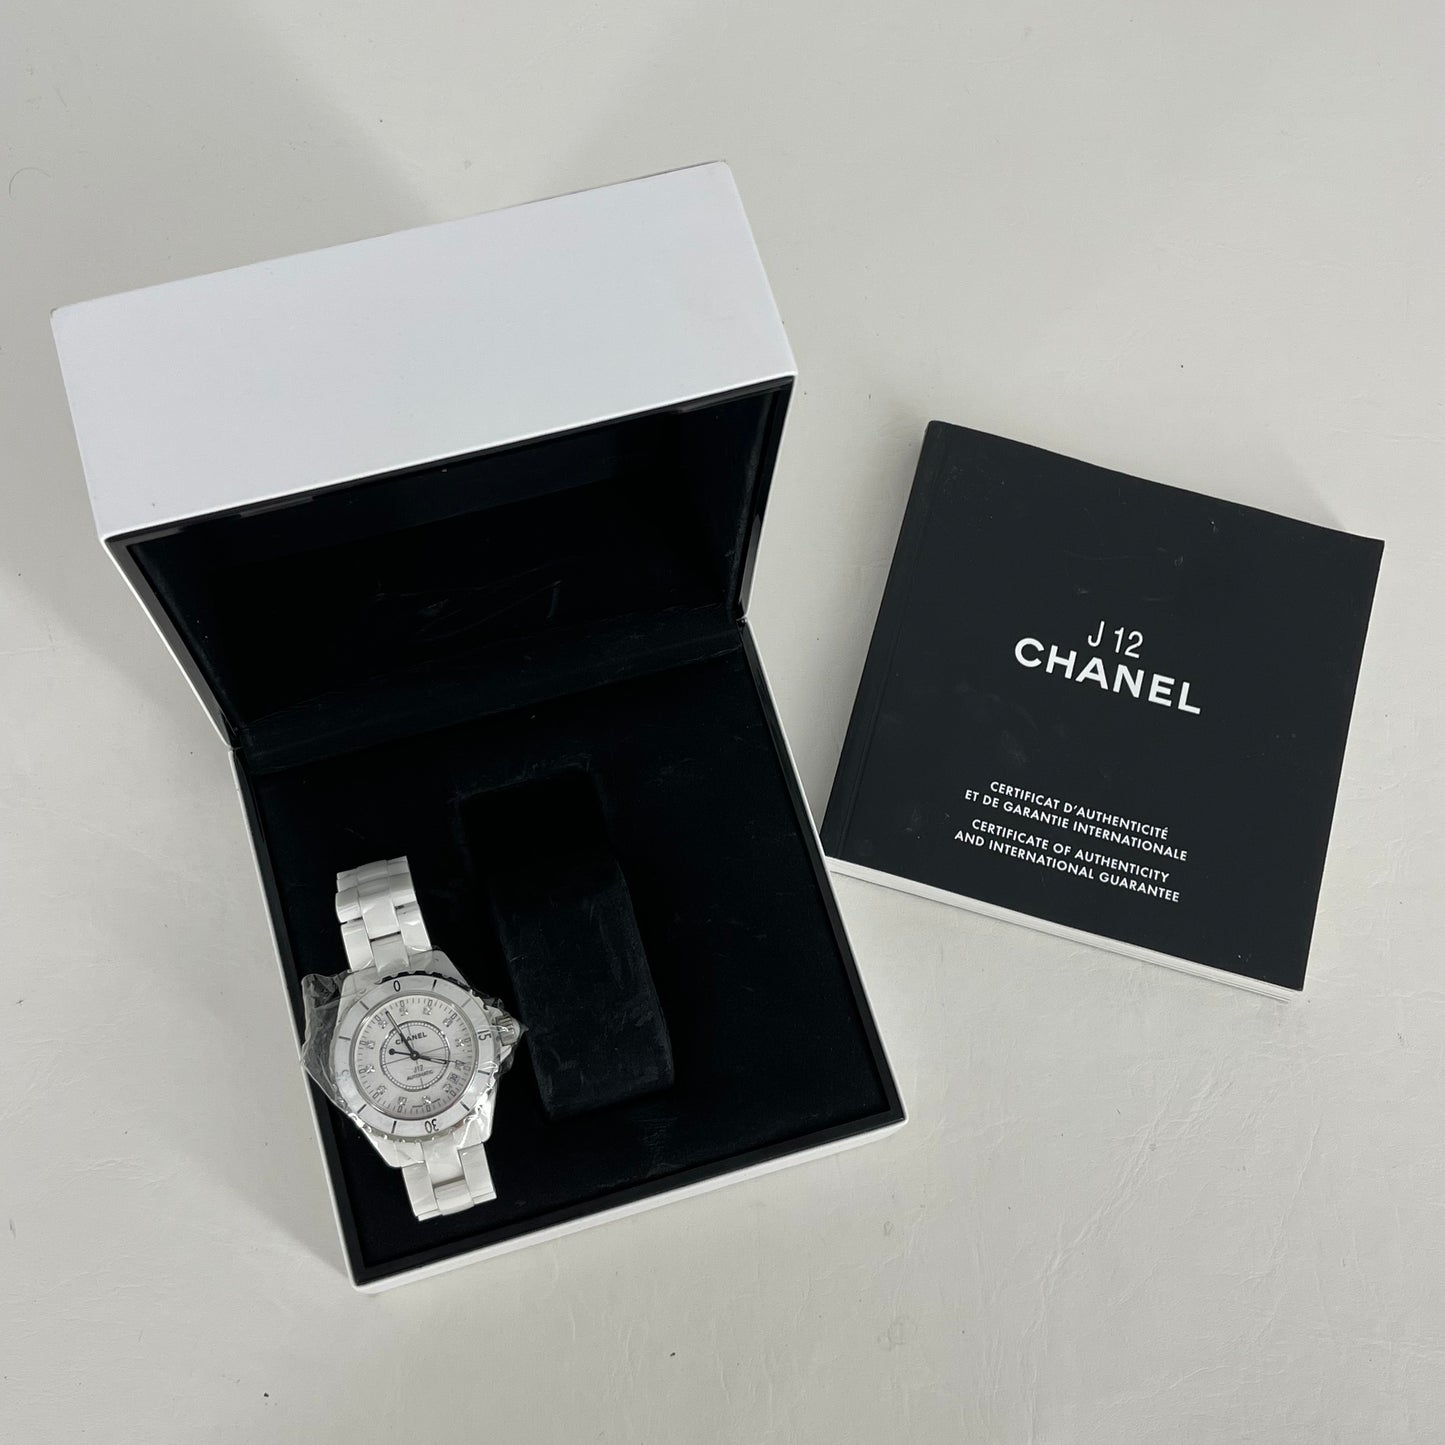 Authentic Chanel J12 White Ceramic 33mm Watch